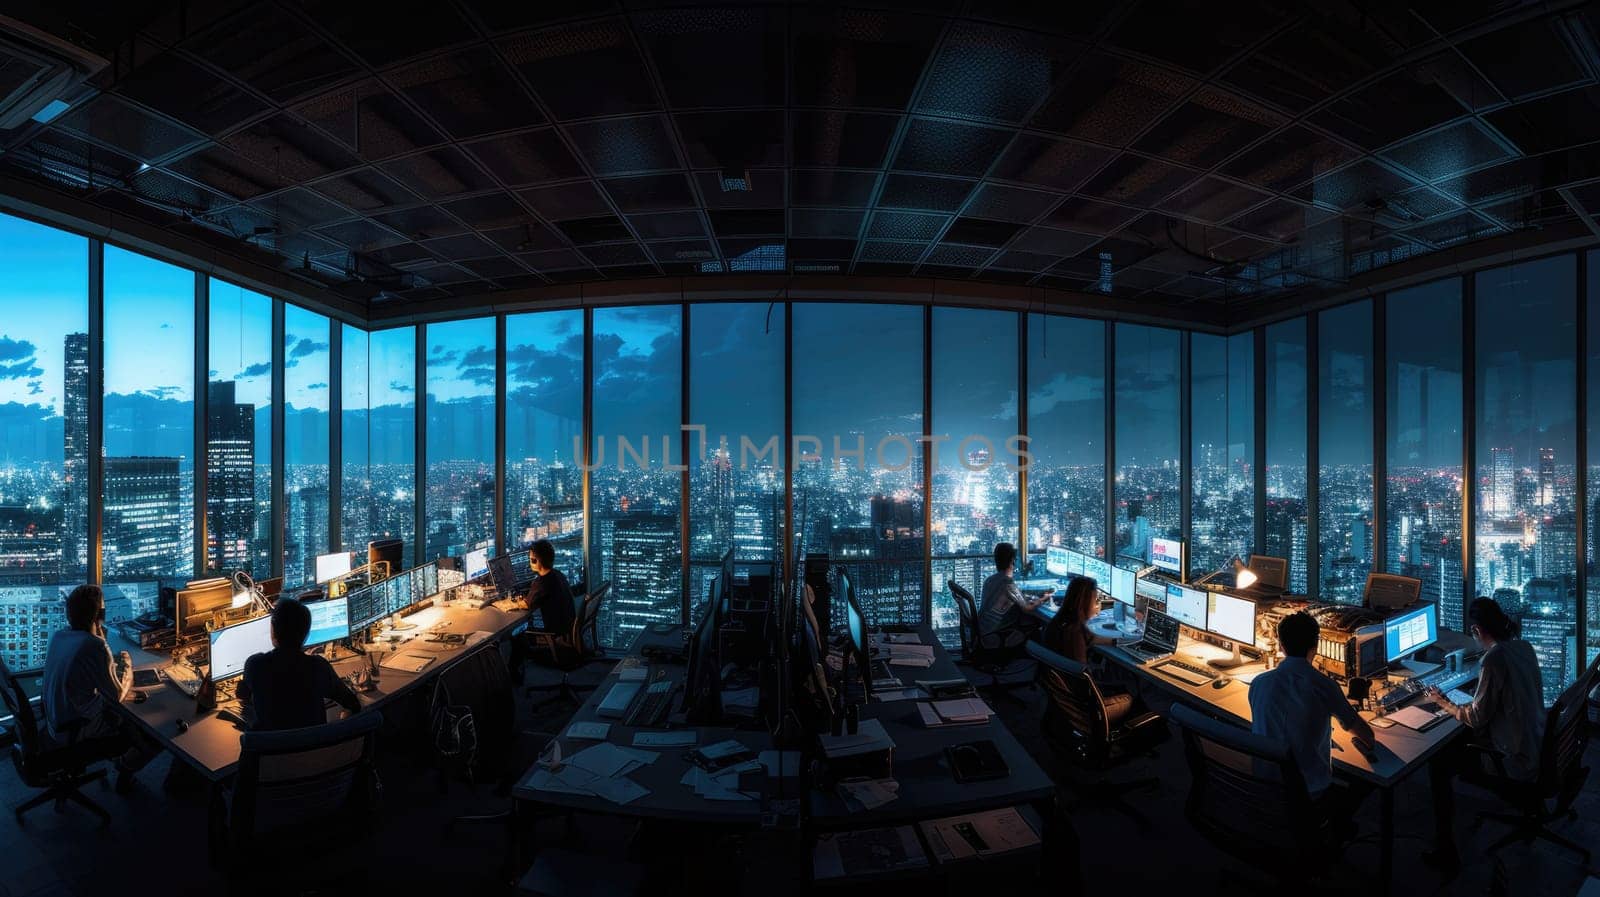 A gathering of individuals occupies office desks in a building during nighttime. The room features water fixtures, tables, and glass elements. AIG41